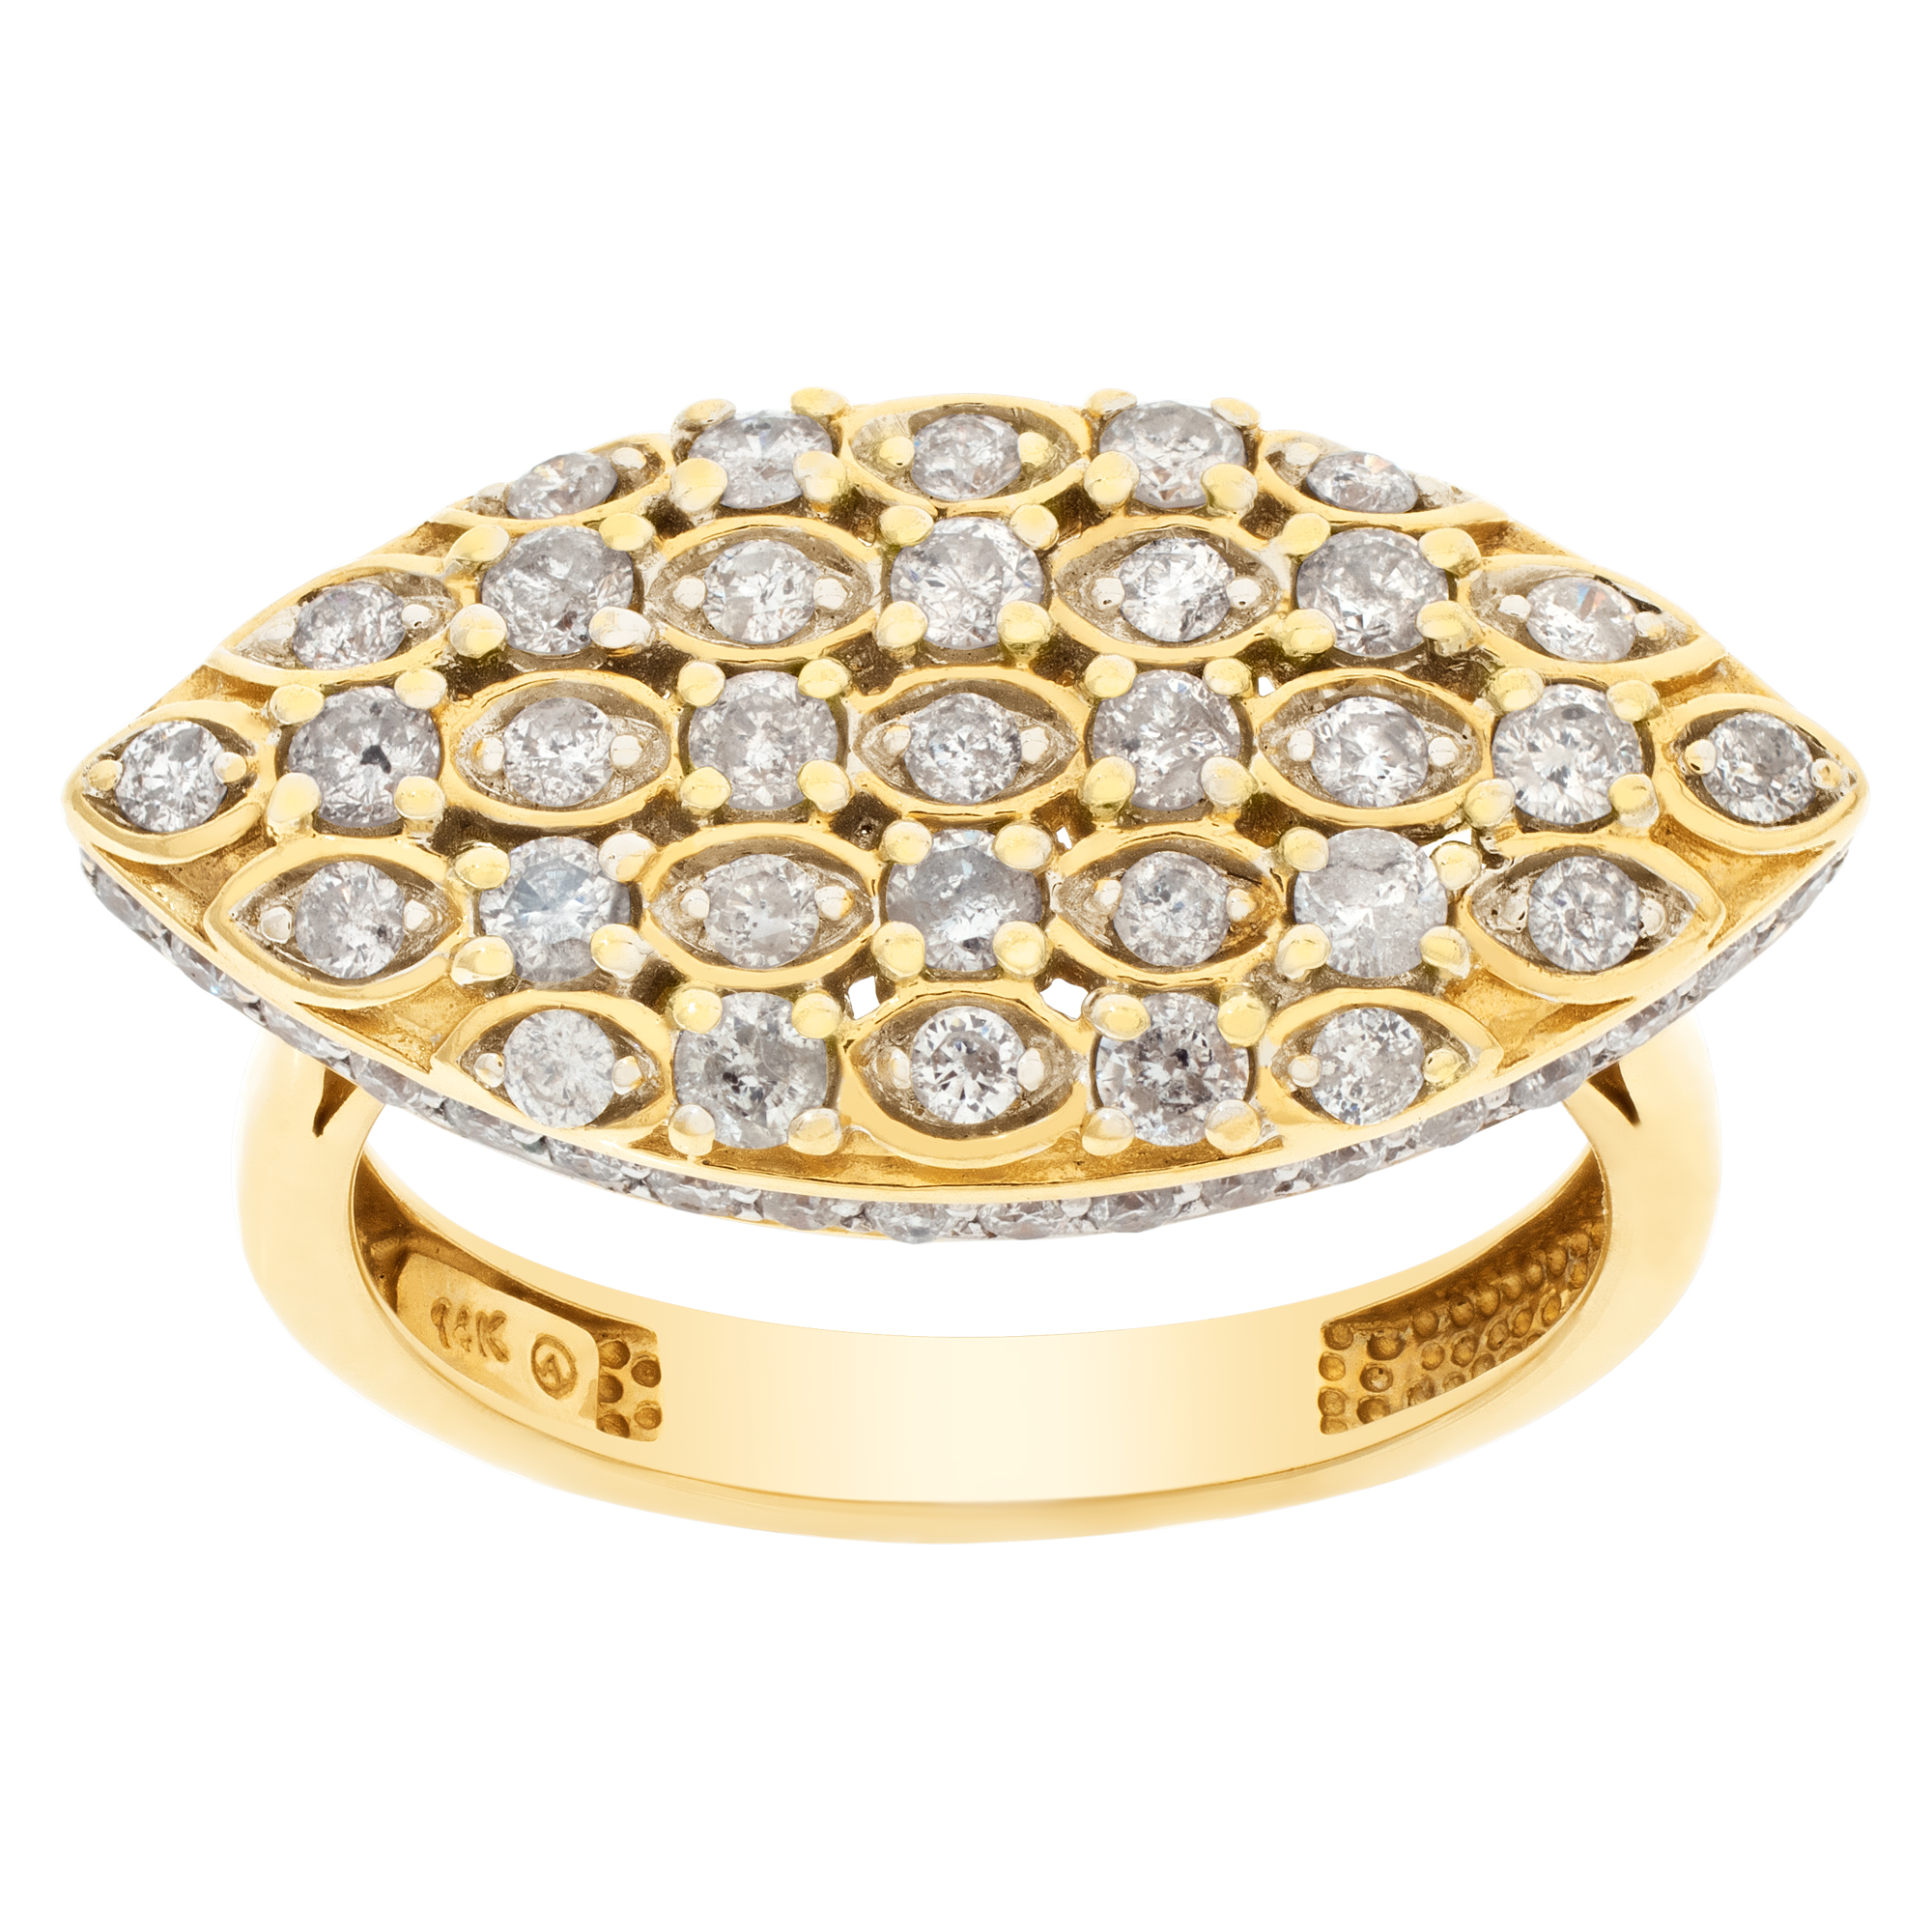 Ellipse Diamond ring in 14k yellow gold, with approximately  0.93 carat round brilliant cut diamond. Size 7